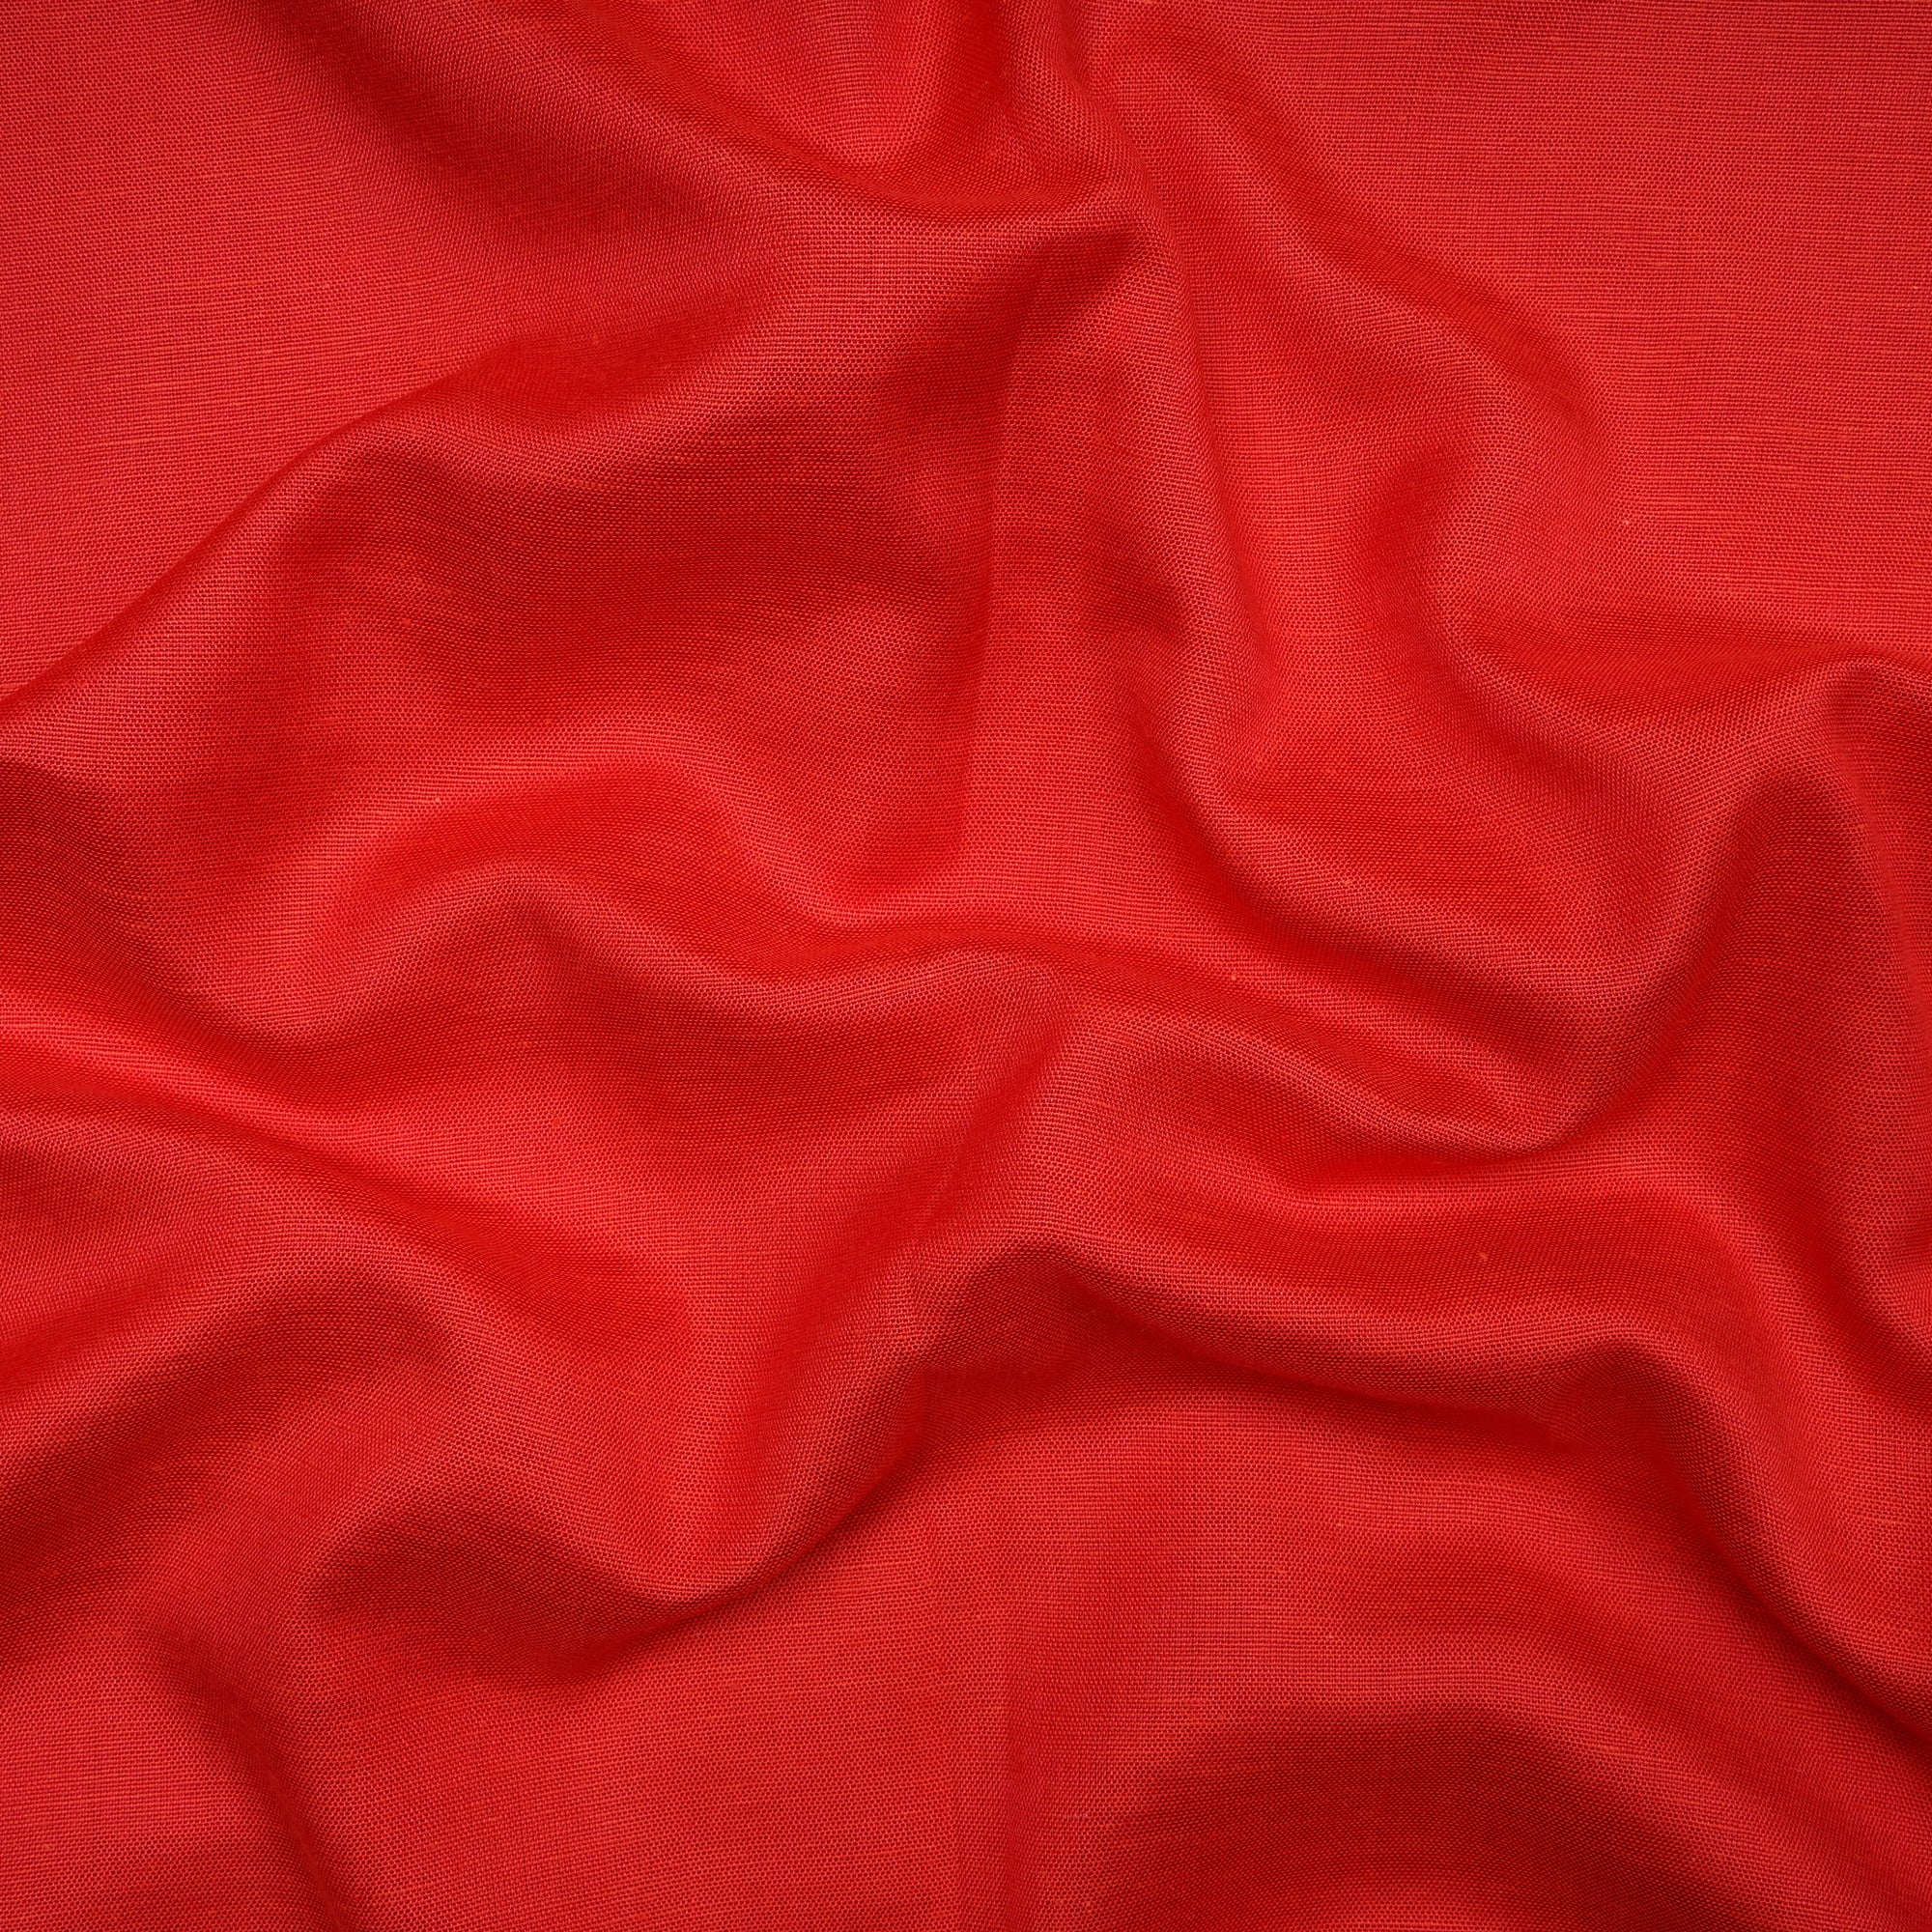 Bittersweet Red Rayon South Cotton Fabric